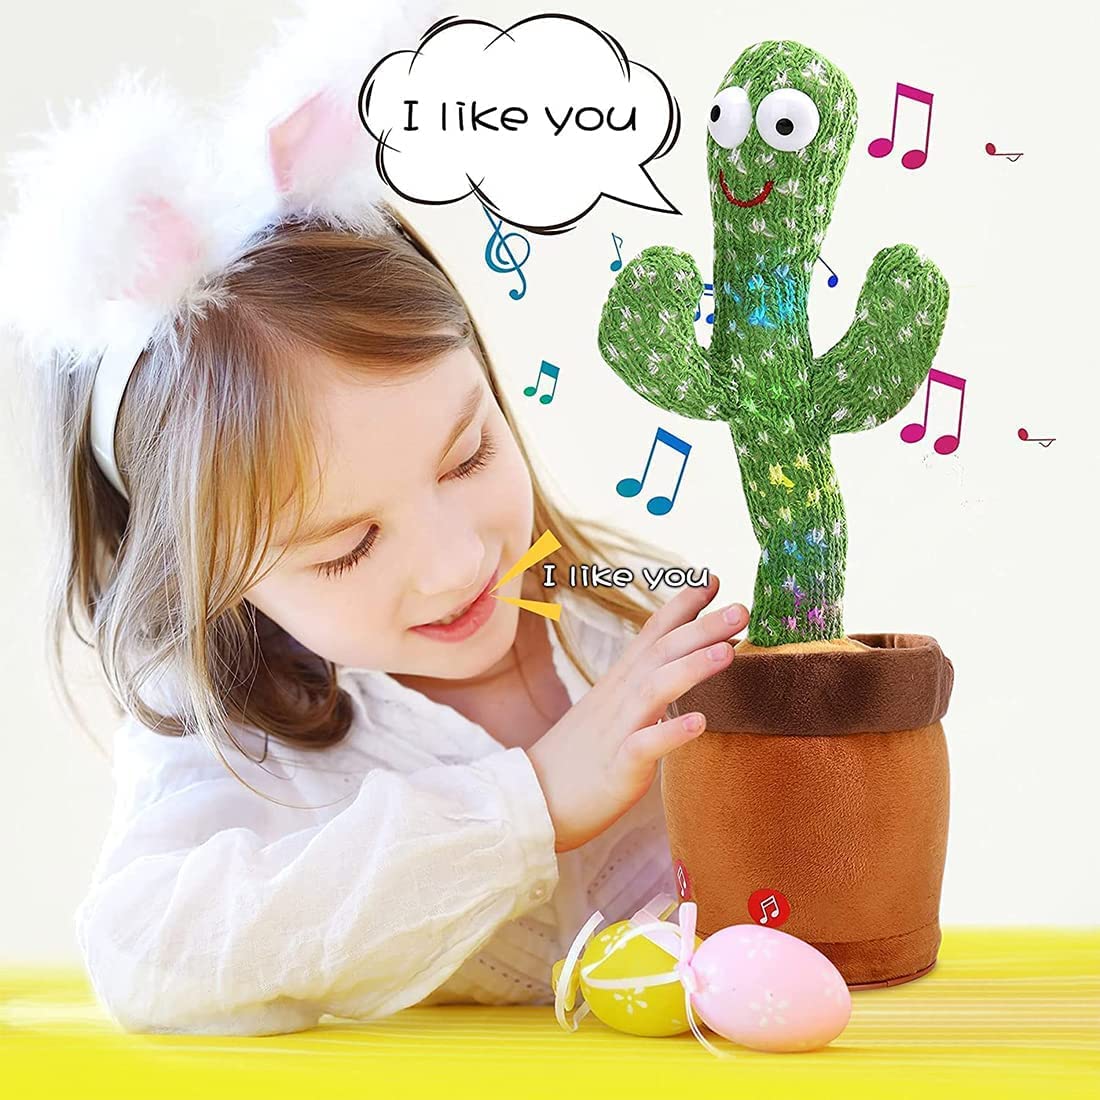 Talking Cactus Baby Toys for Kids, Dancing Cactus Toys Can Sing Wriggle & Singing Recording Repeat What You Say Funny Education Toys for Children